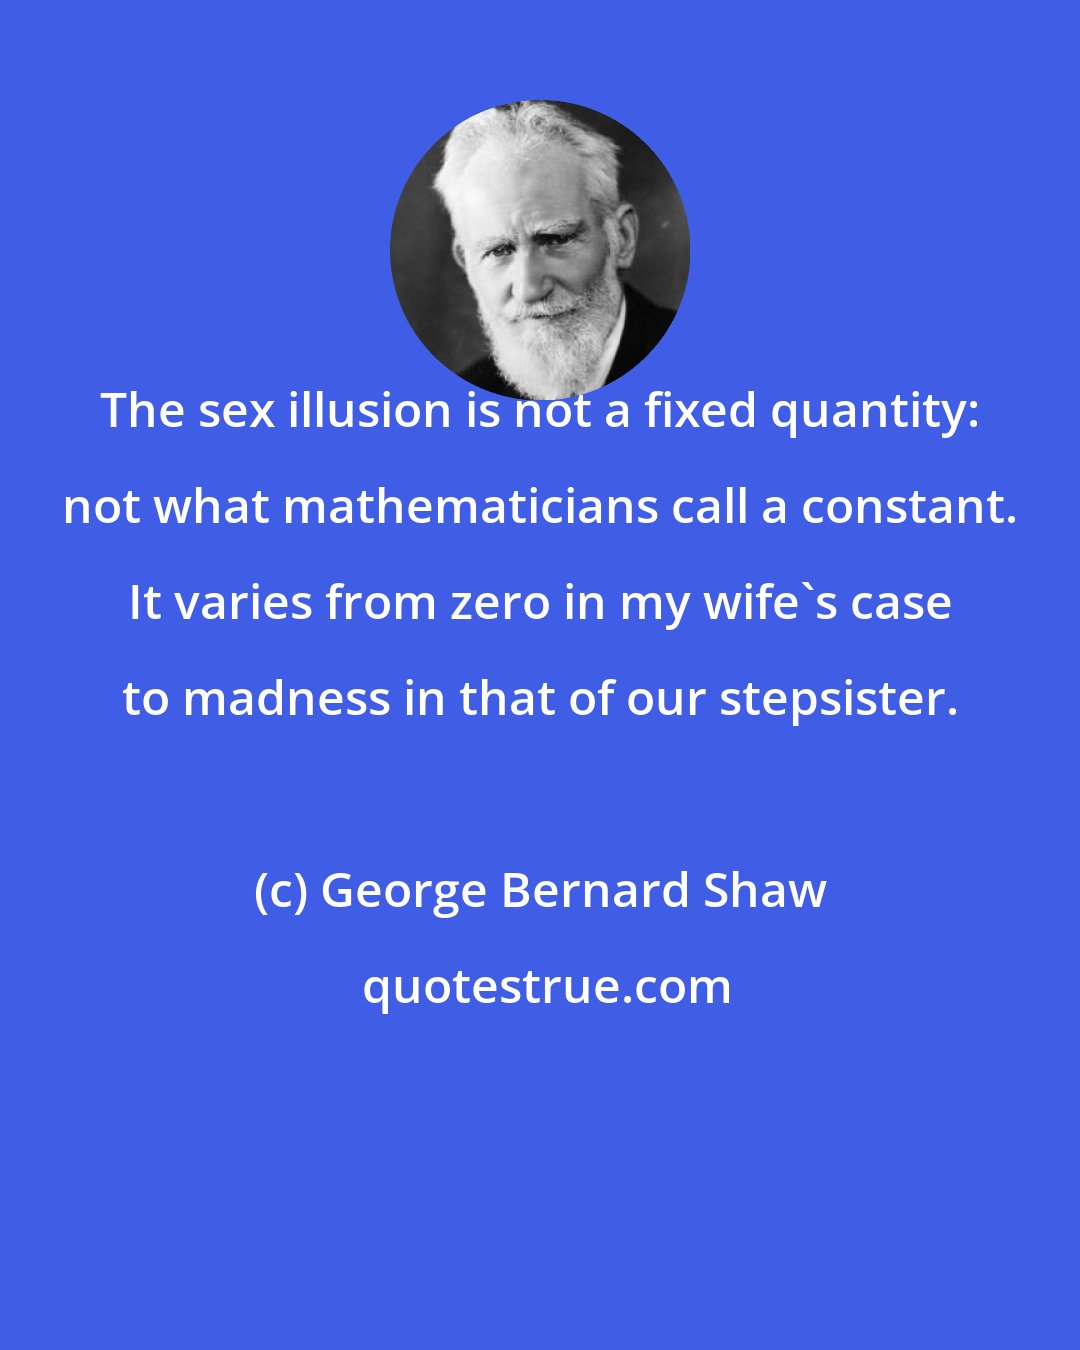 George Bernard Shaw: The sex illusion is not a fixed quantity: not what mathematicians call a constant. It varies from zero in my wife's case to madness in that of our stepsister.